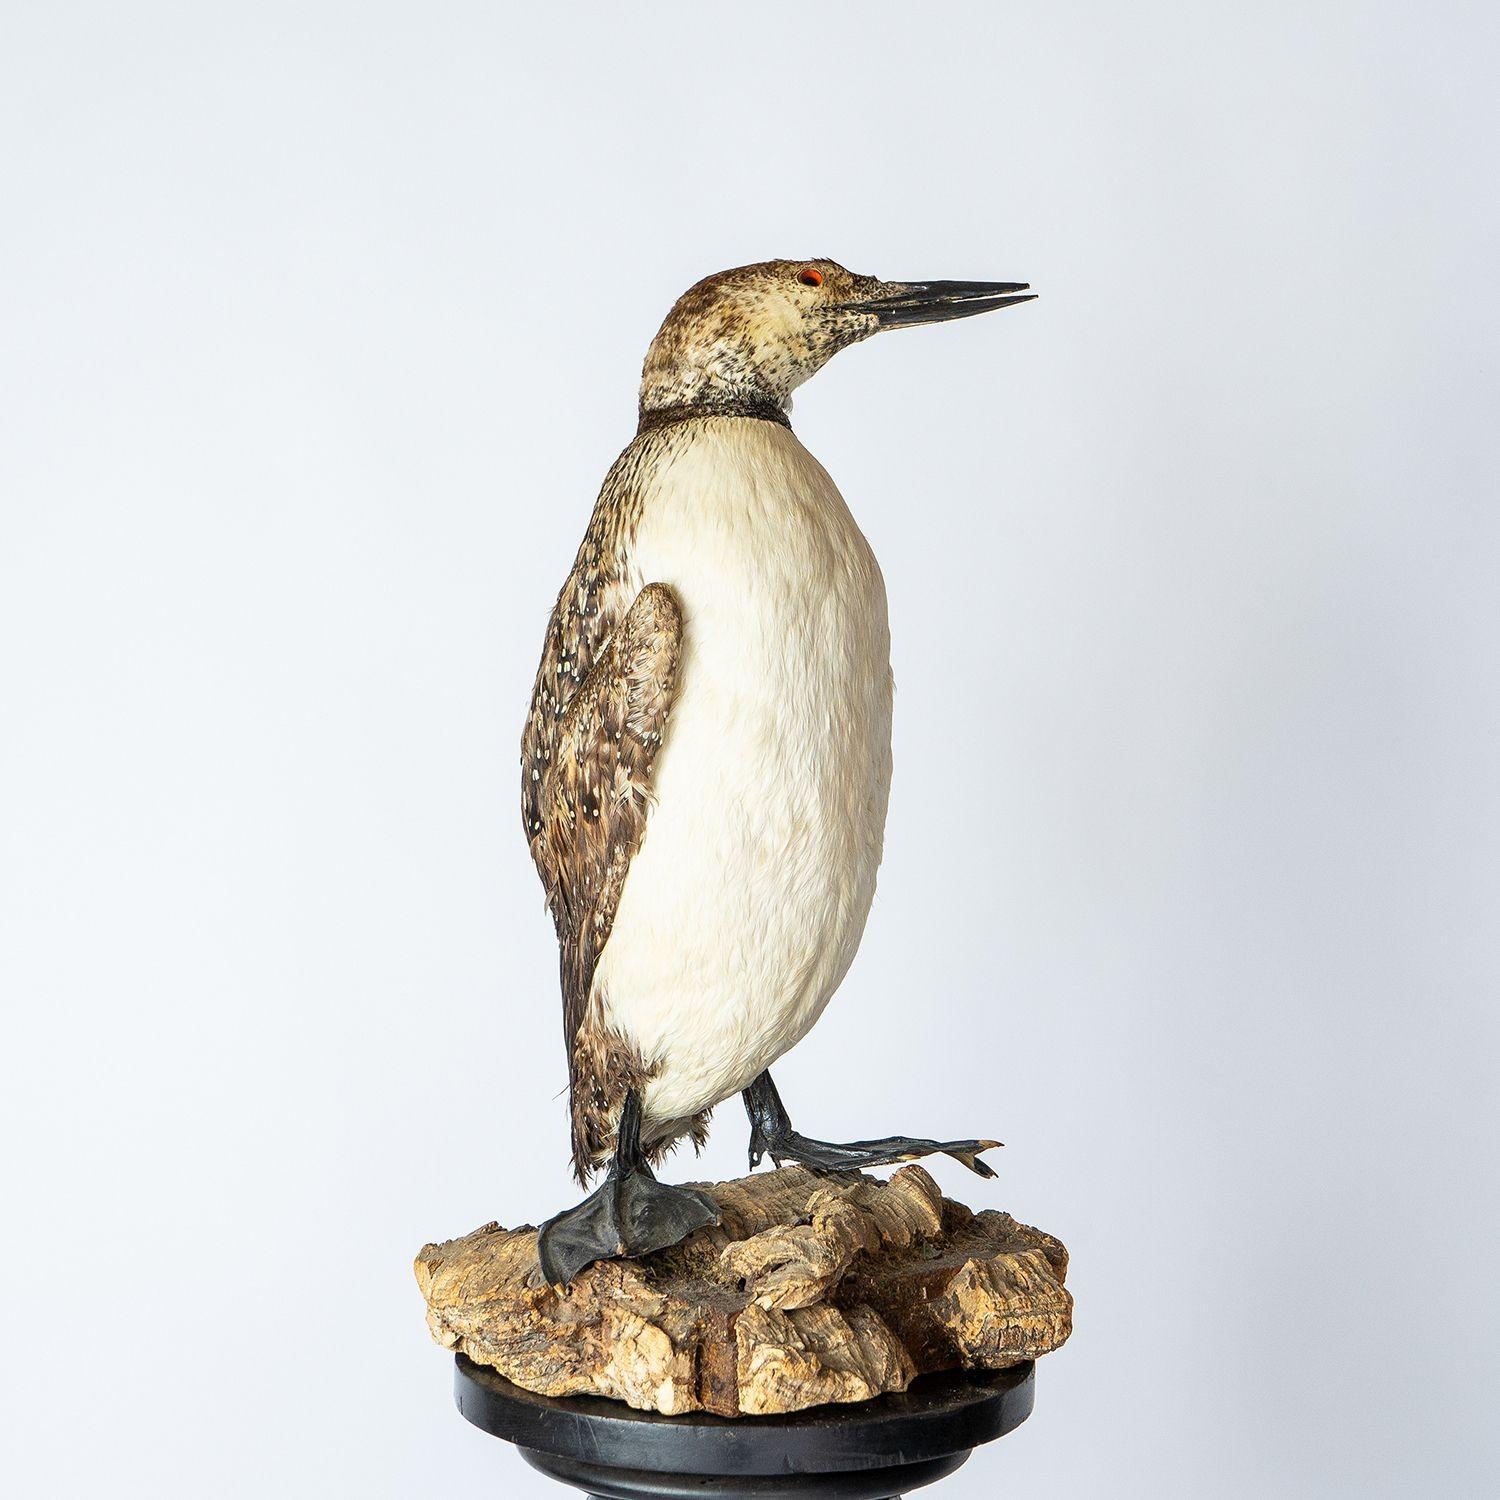 Edwardian Antique Mounted Taxidermy Loon on Naturalistic Base, Early 20th Century Bird For Sale